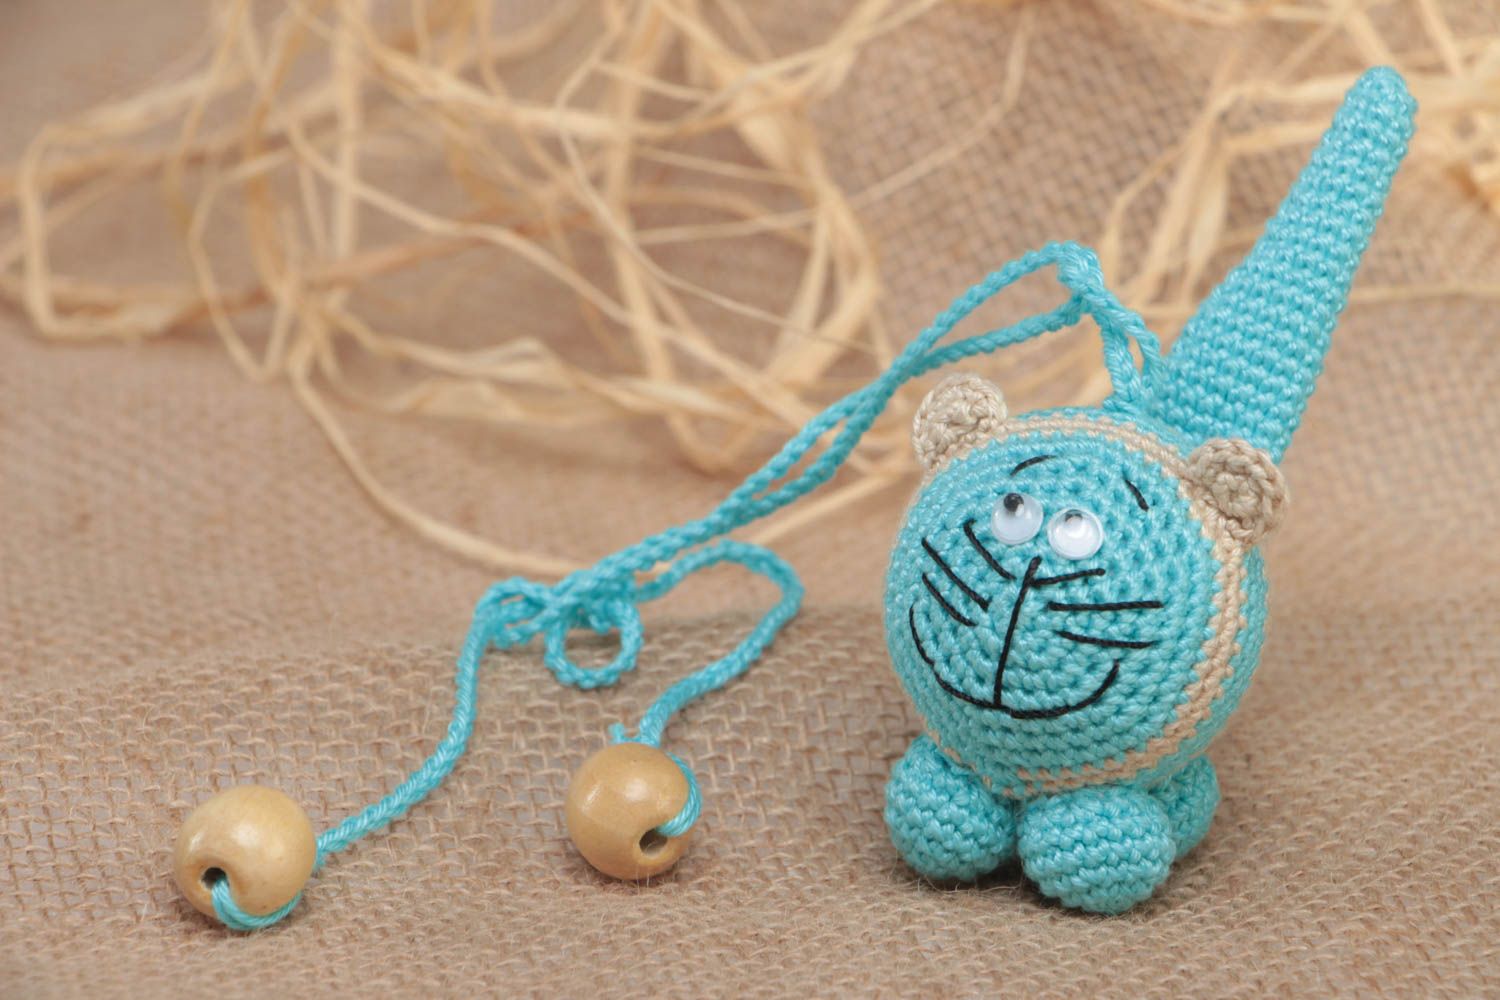 Crocheted cotton rattle small blue cat handmade toy for little children photo 1